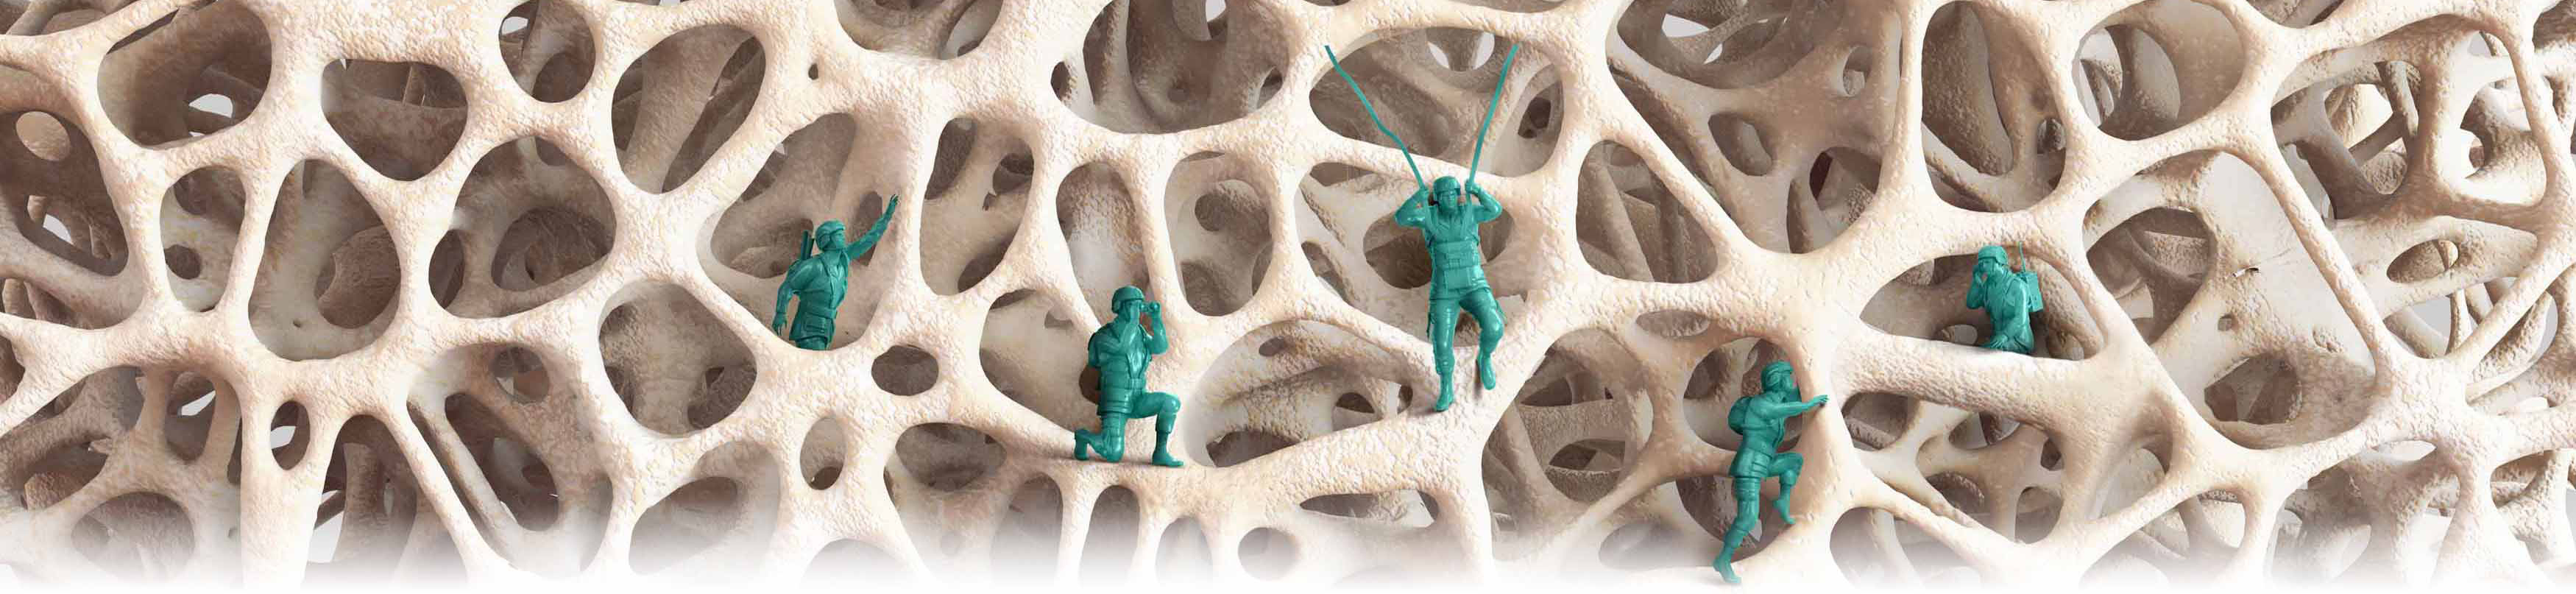 Composite image of green toy soldiers deployed inside a bone matrix